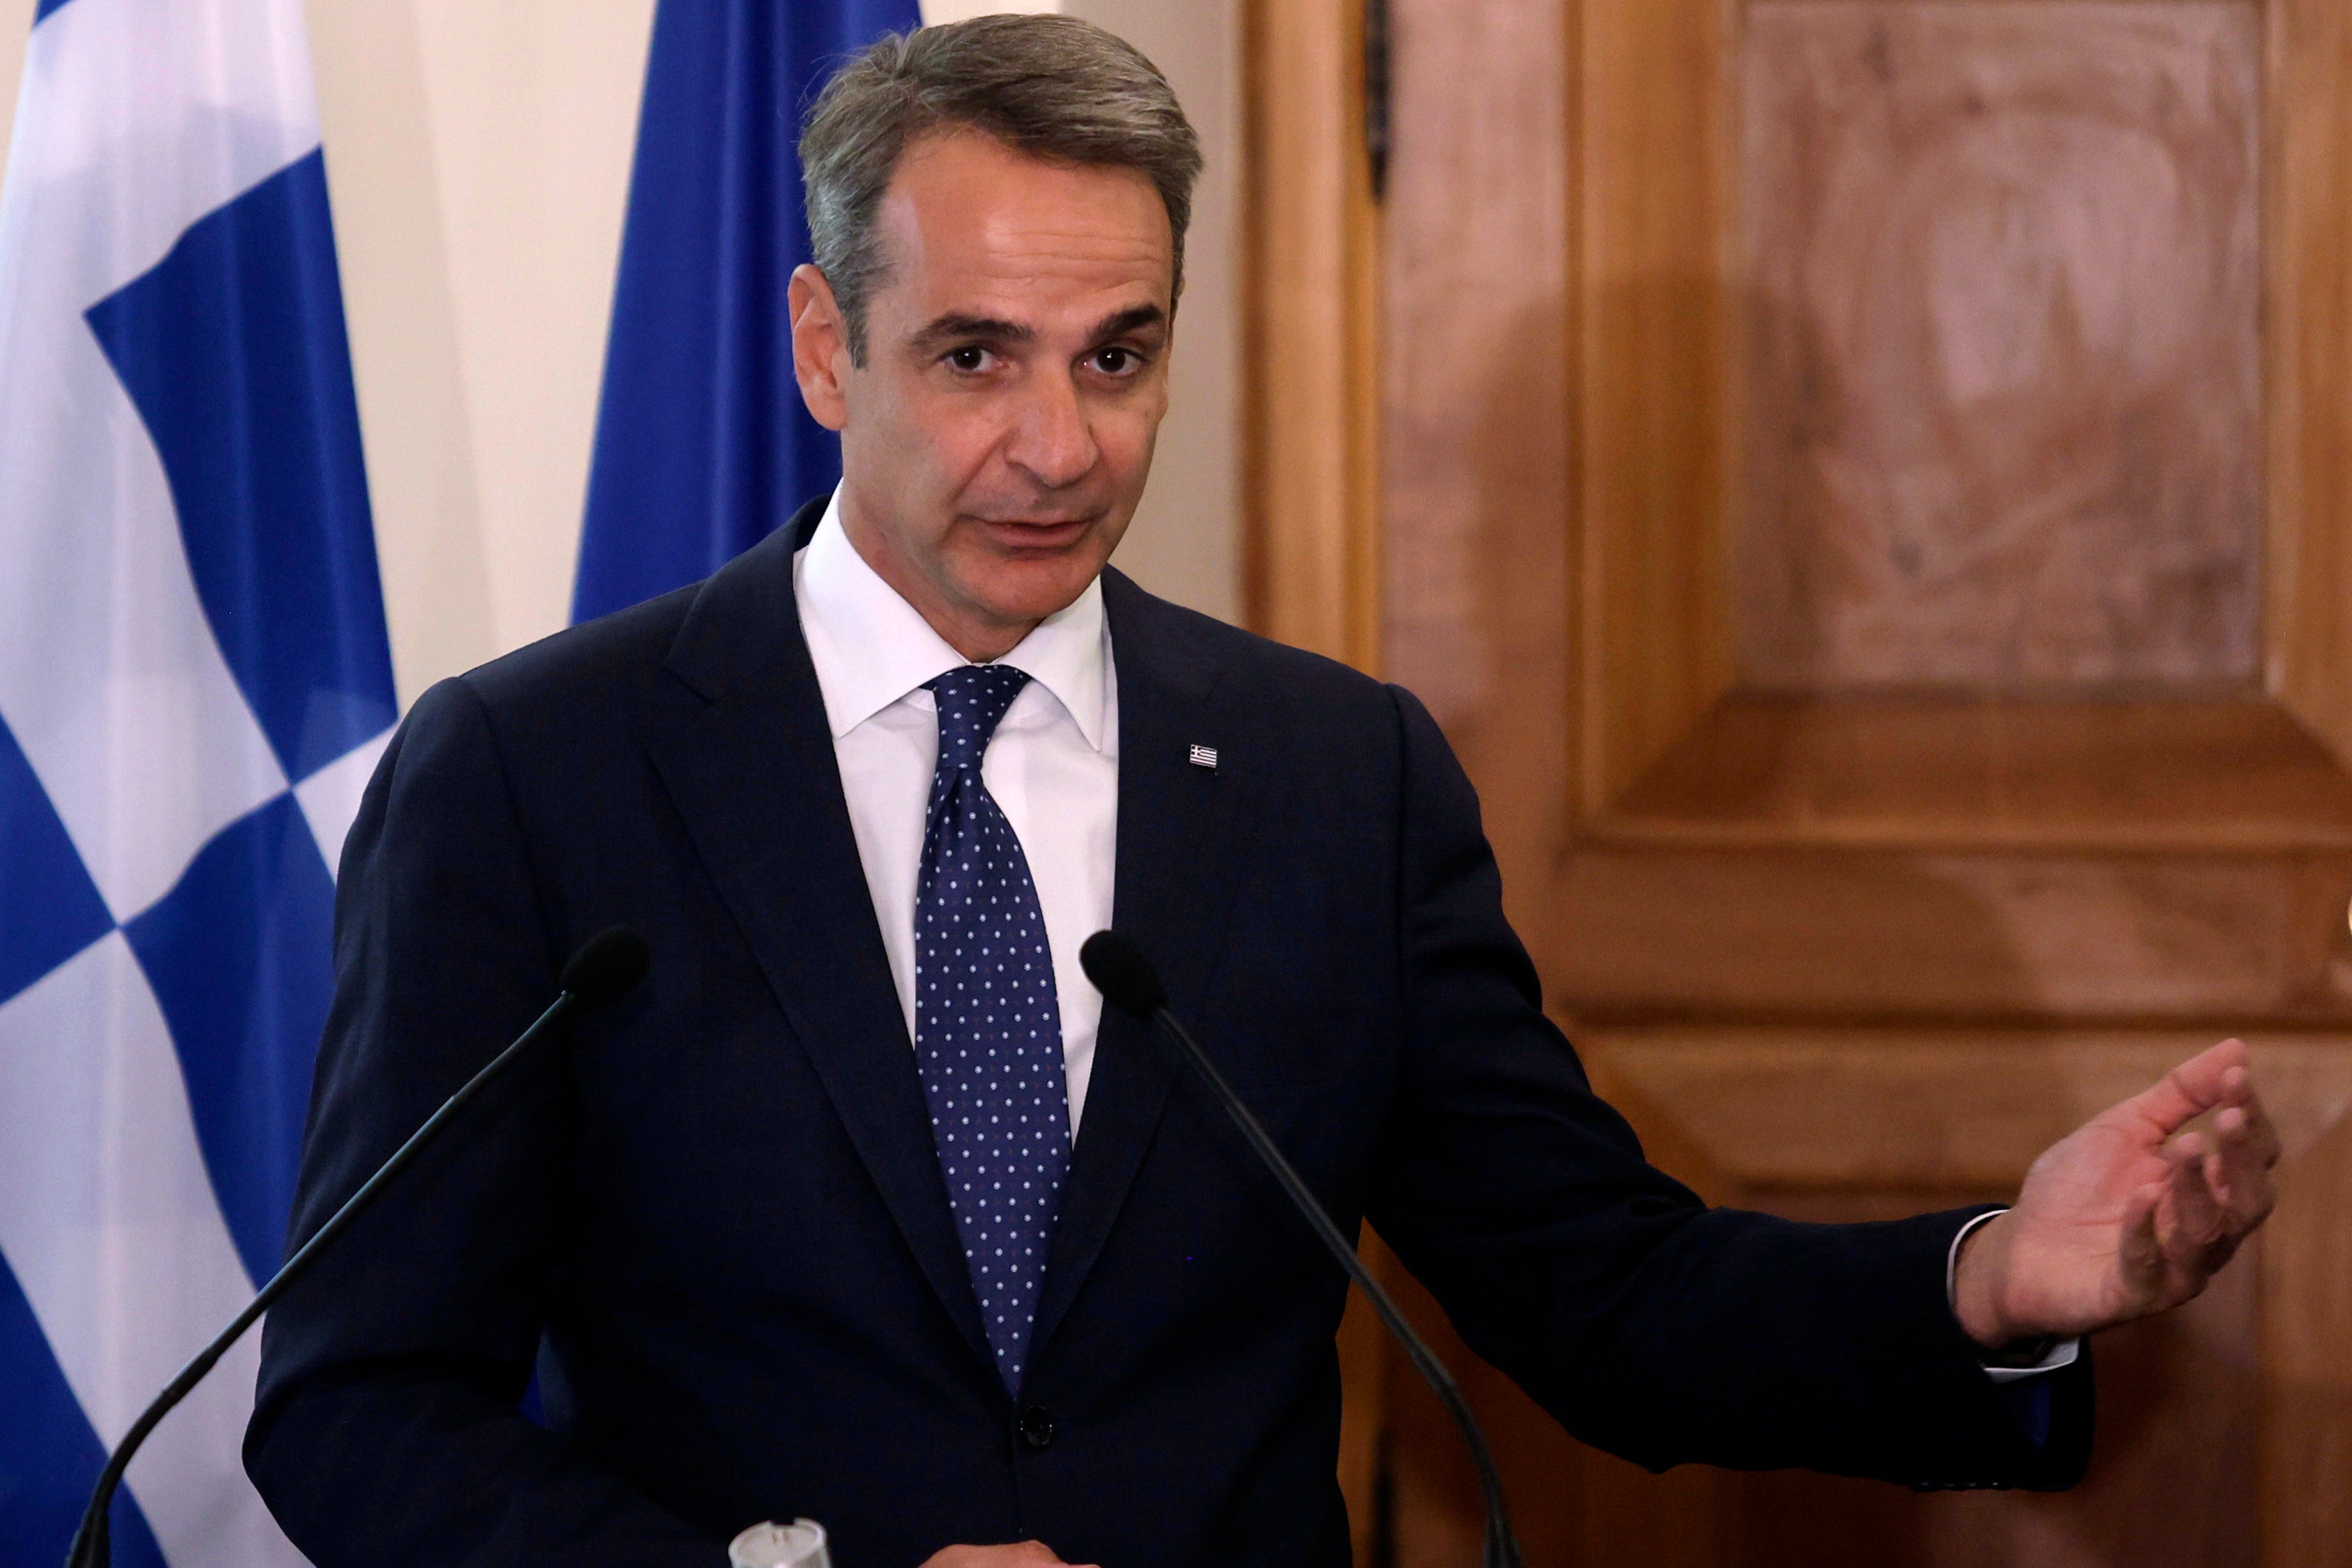 elgin marbles, kyriakos mitsotakis, prime minister, rishi sunak, elgin marbles row erupts as greek pm accuses sunak of cancelling meeting at 11th hour